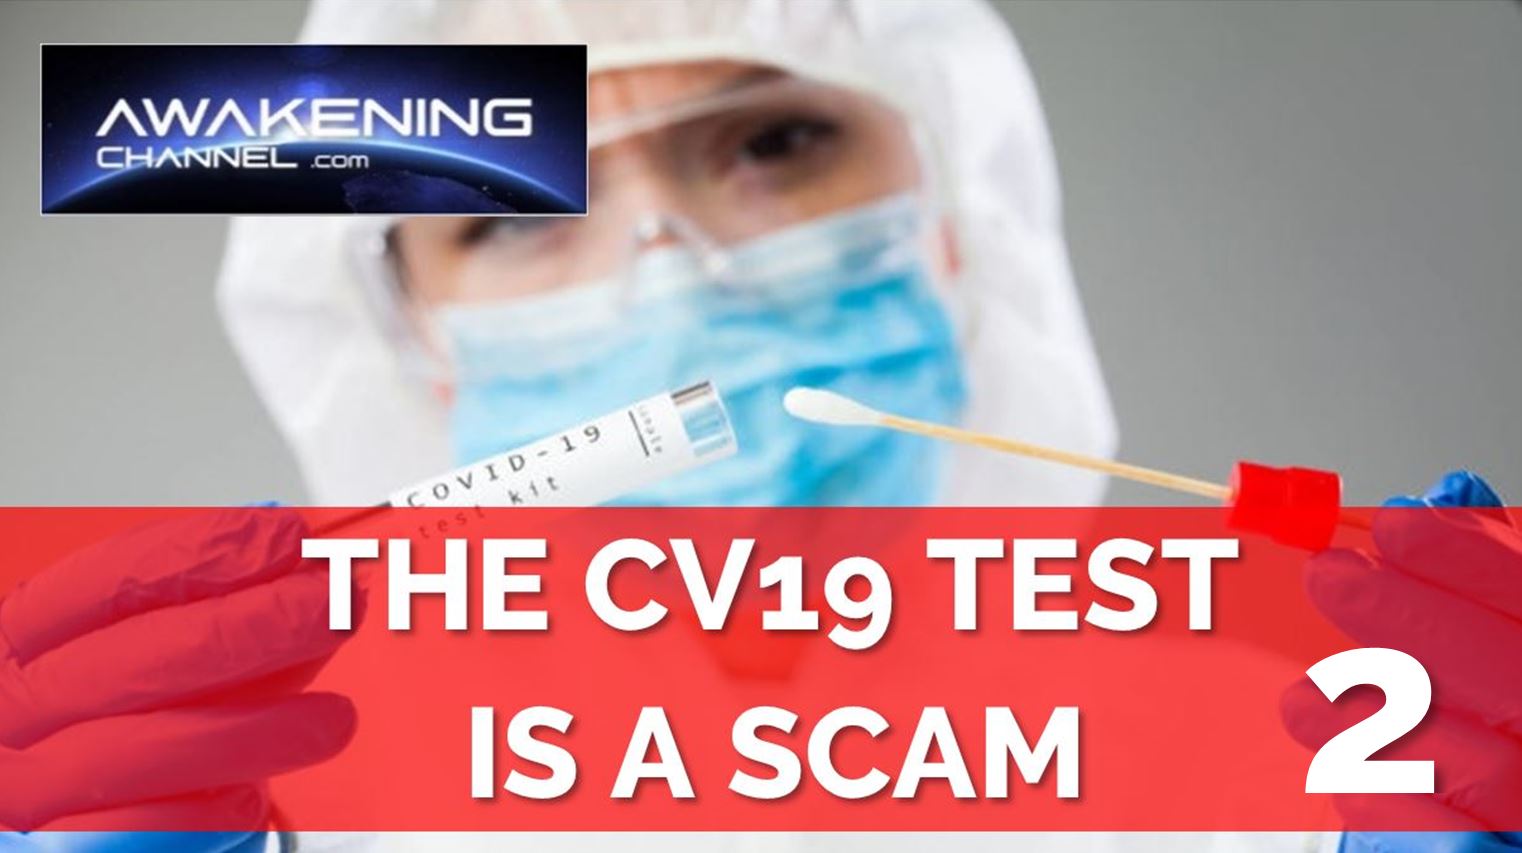 (Part 2/4) THE CV19 TEST IS A SCAM